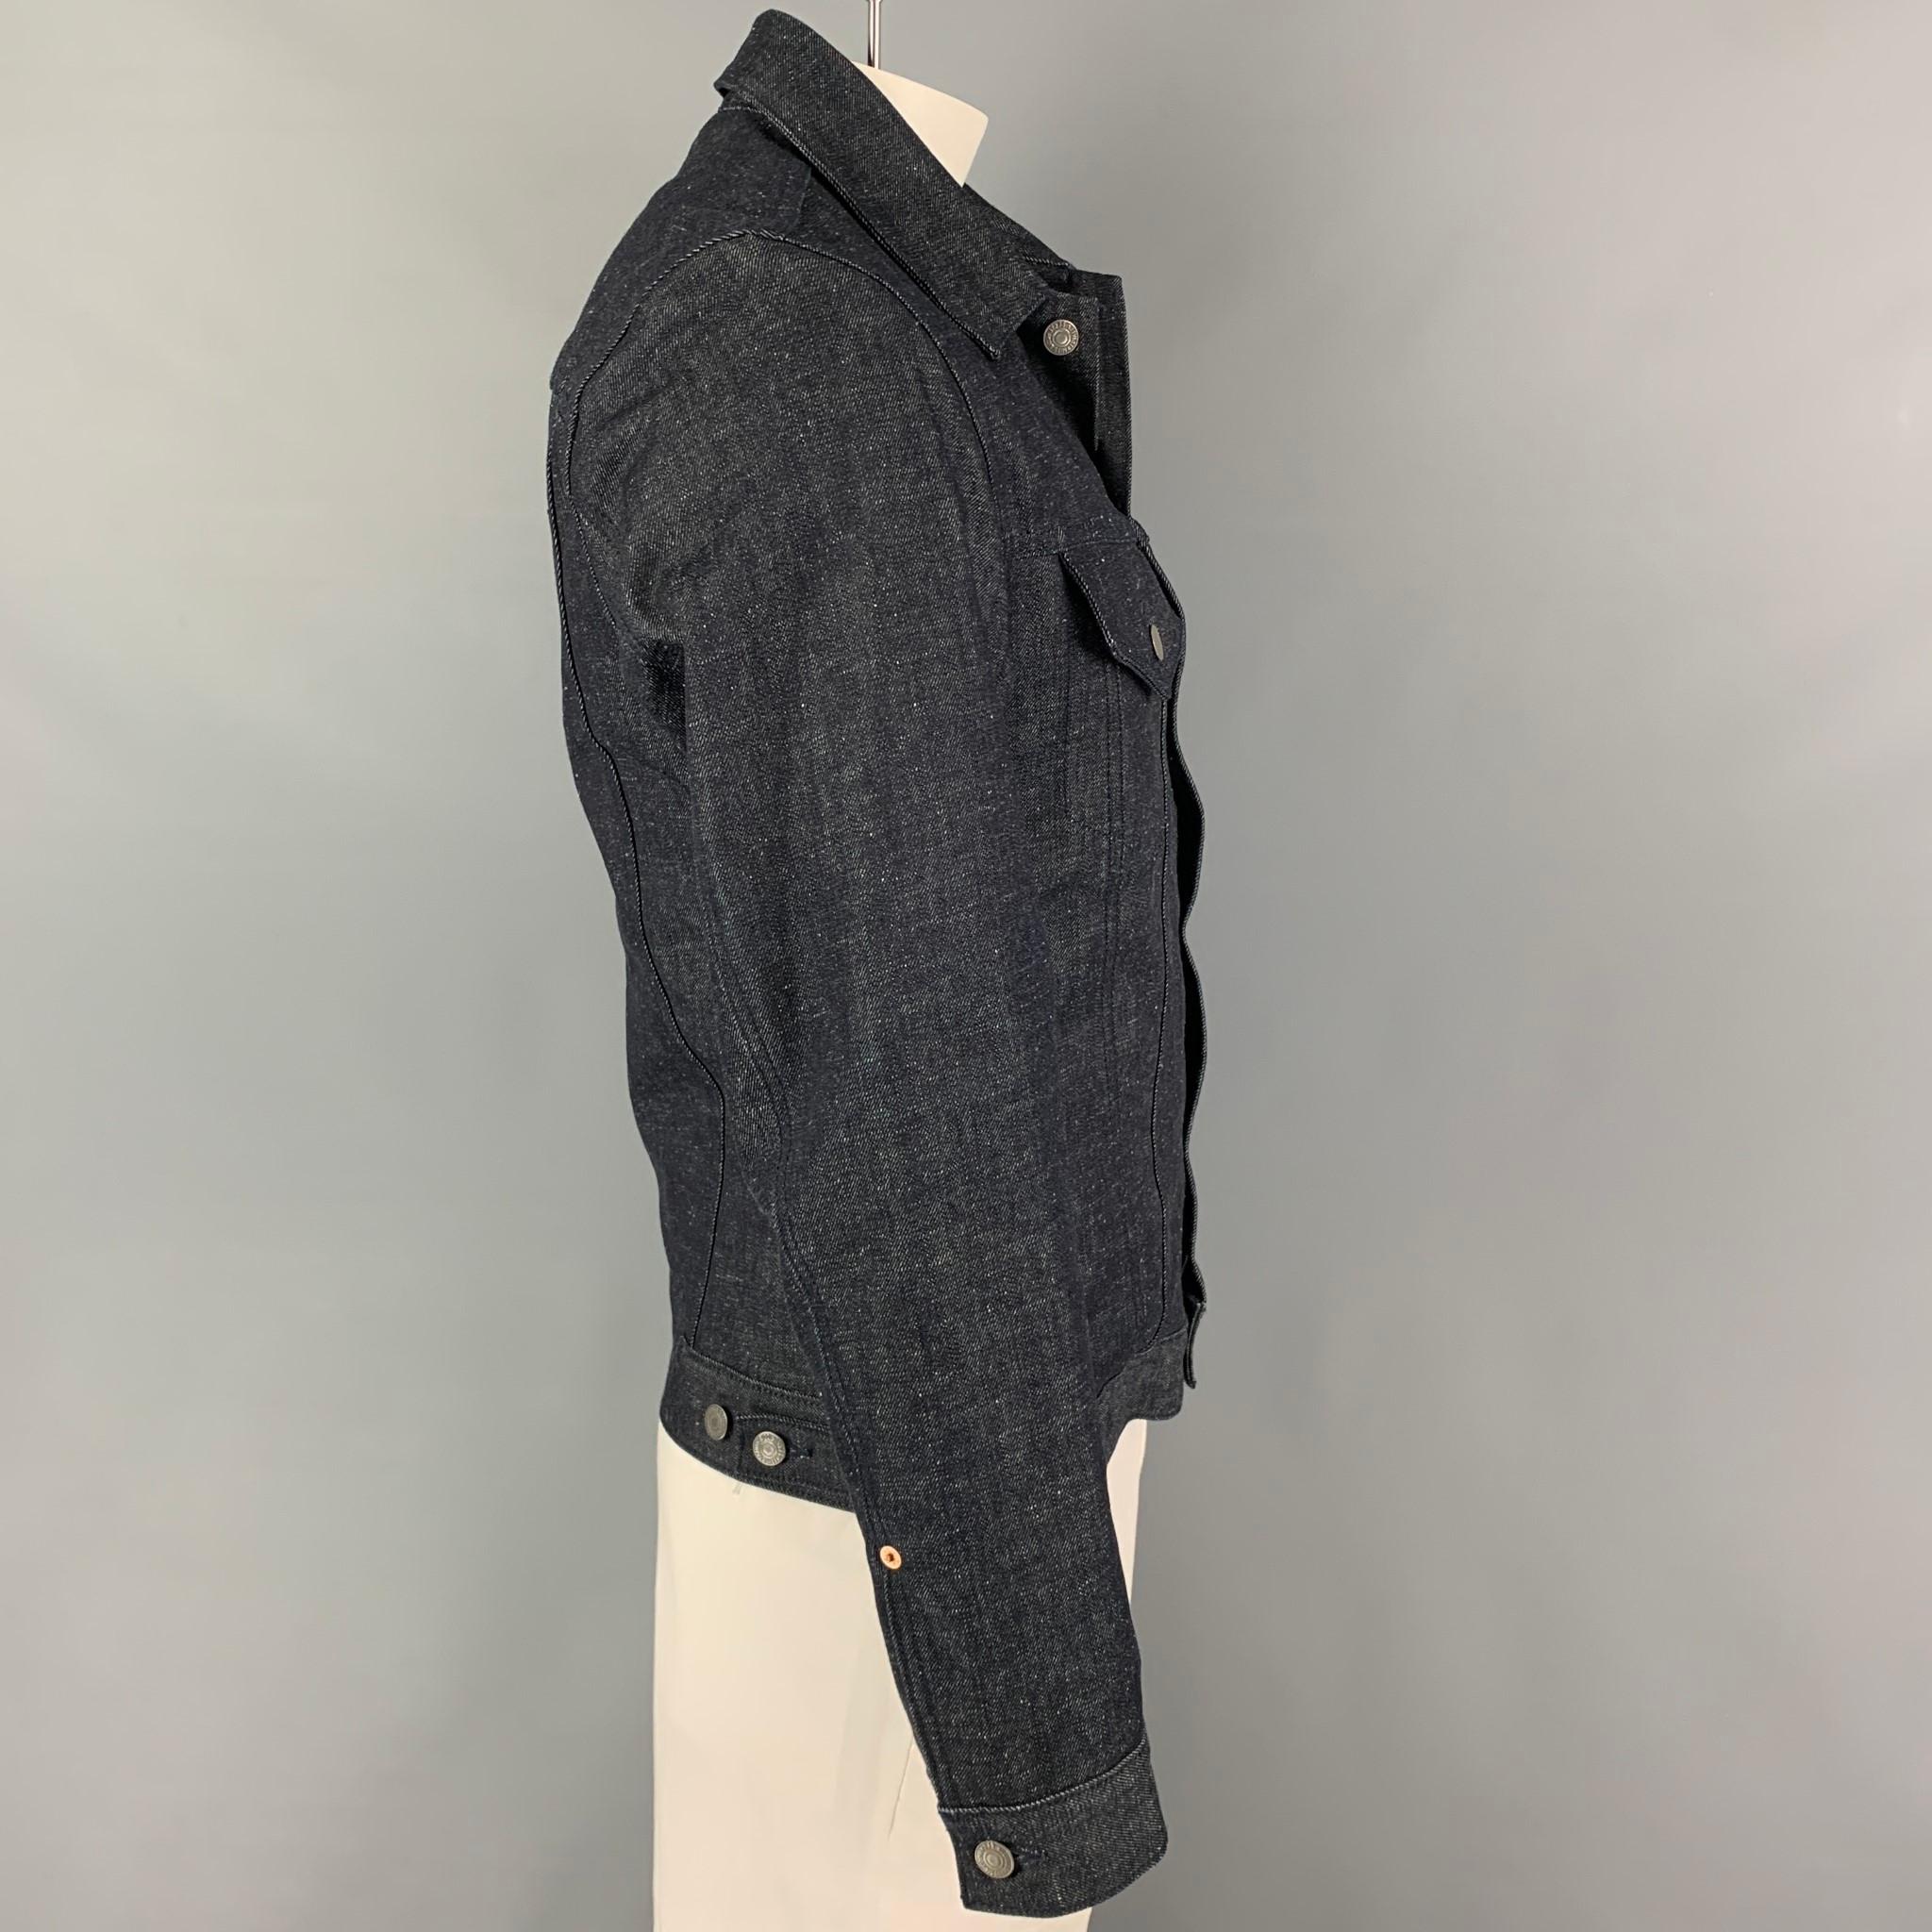 LEVI'S jacket comes in a blue indigo denim with a wool stripe interior featuring a trucker style, pointed collar, patch pockets, and a buttoned closure. 

Excellent Pre-Owned Condition.
Marked: M

Measurements:

Shoulder: 18 in.
Chest: 38